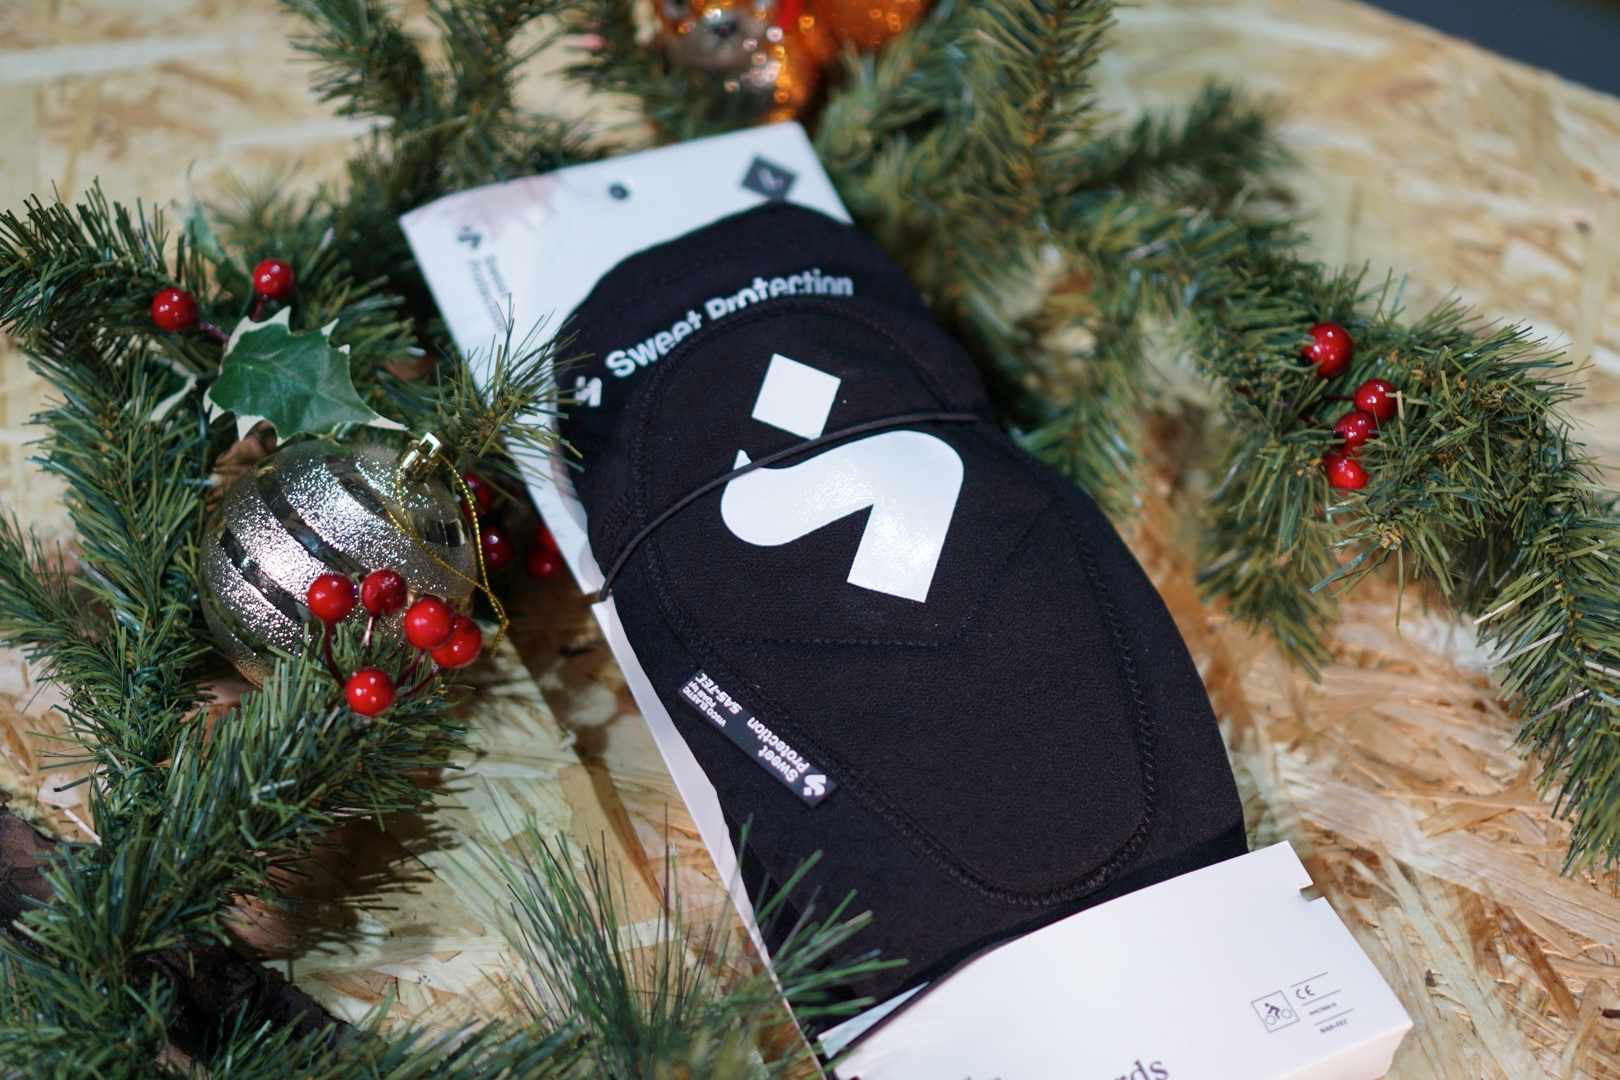 Sweet Protection Knee guards christmas countdown